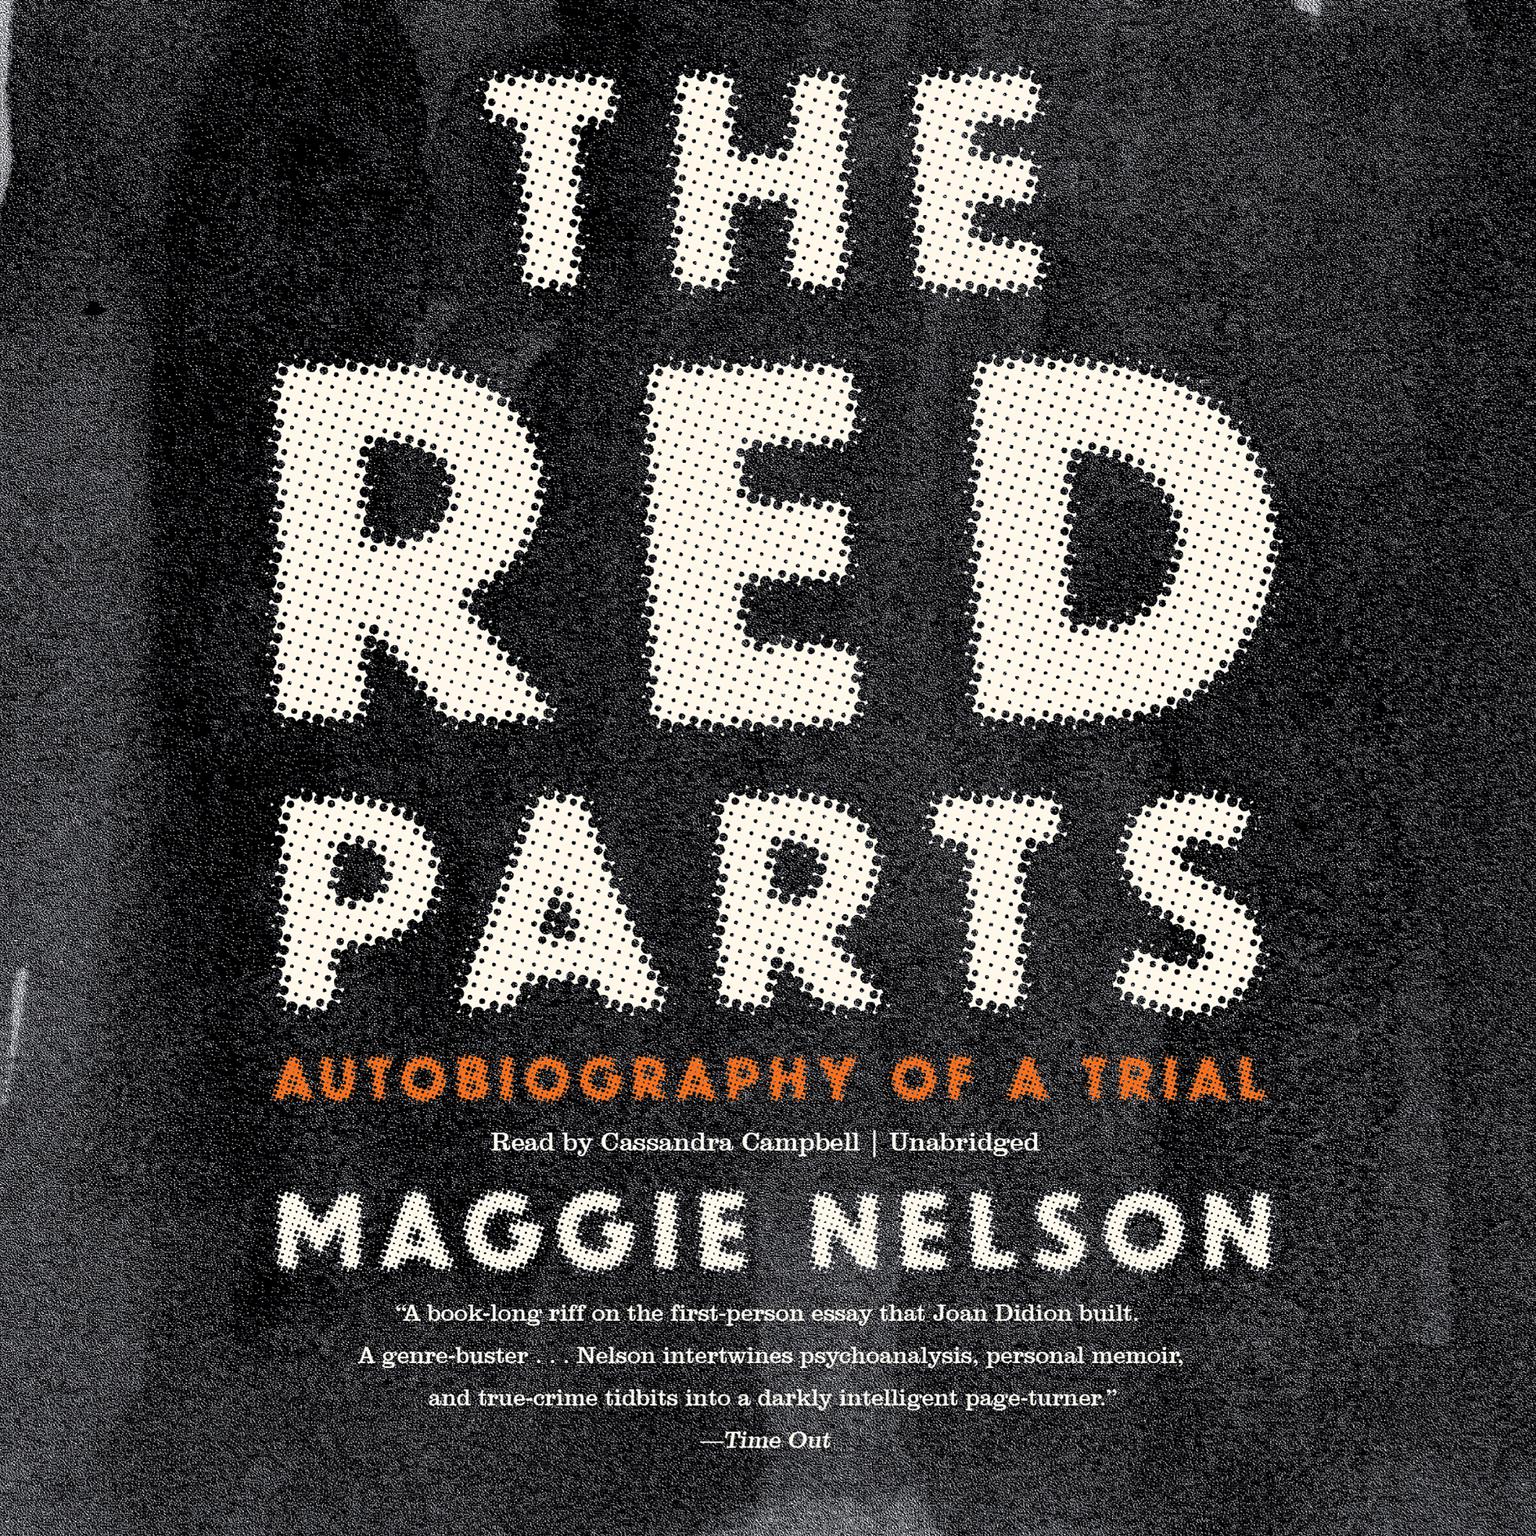 The Red Parts: Autobiography of a Trial Audiobook, by Maggie Nelson